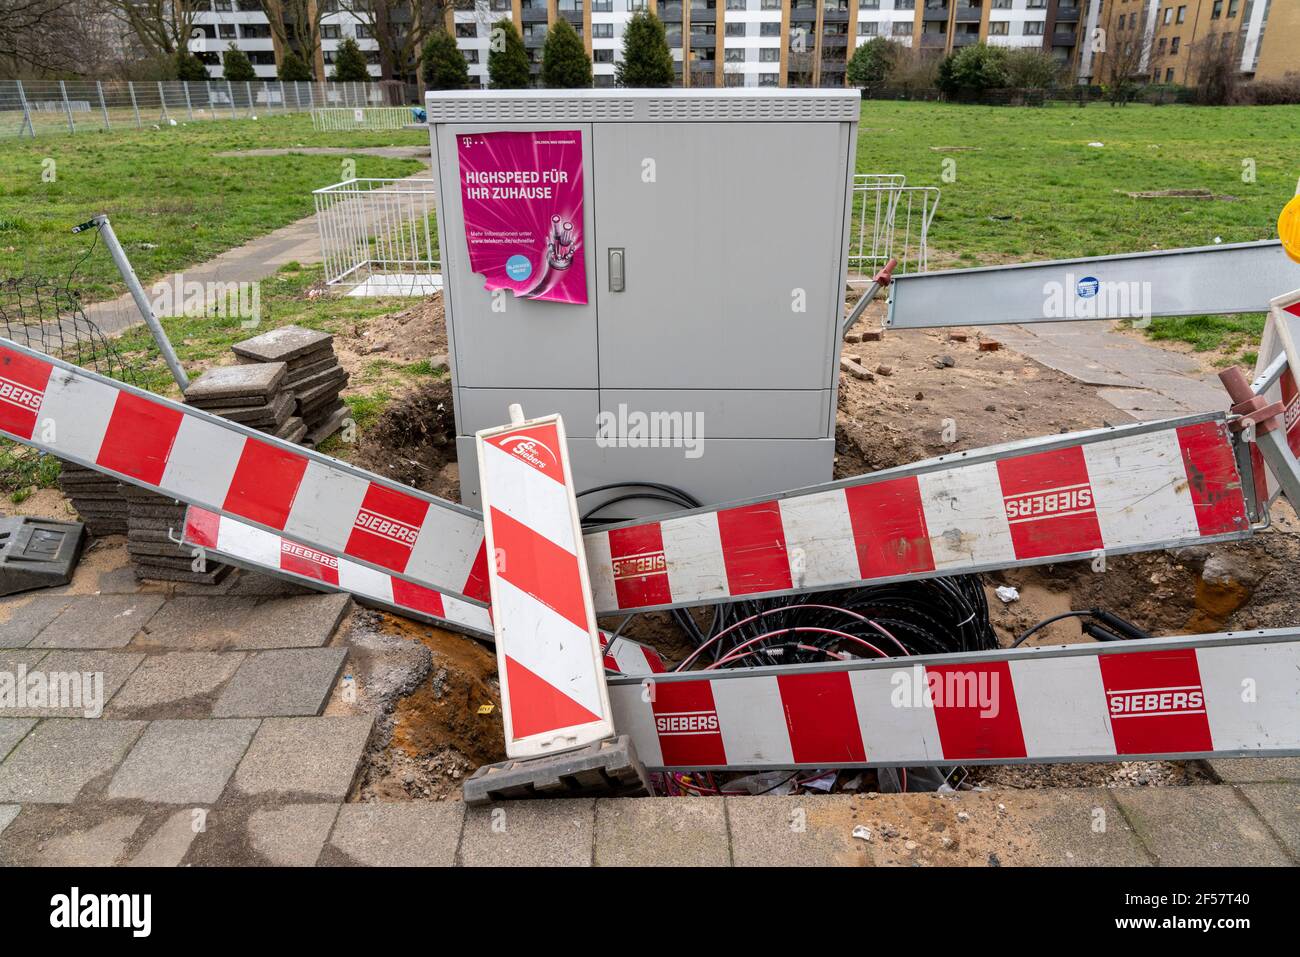 Deutsche Telekom construction site in the Hochheide district of Duisburg, connection of fast internet, fibre optic network, broadband expansion, NRW, Stock Photo